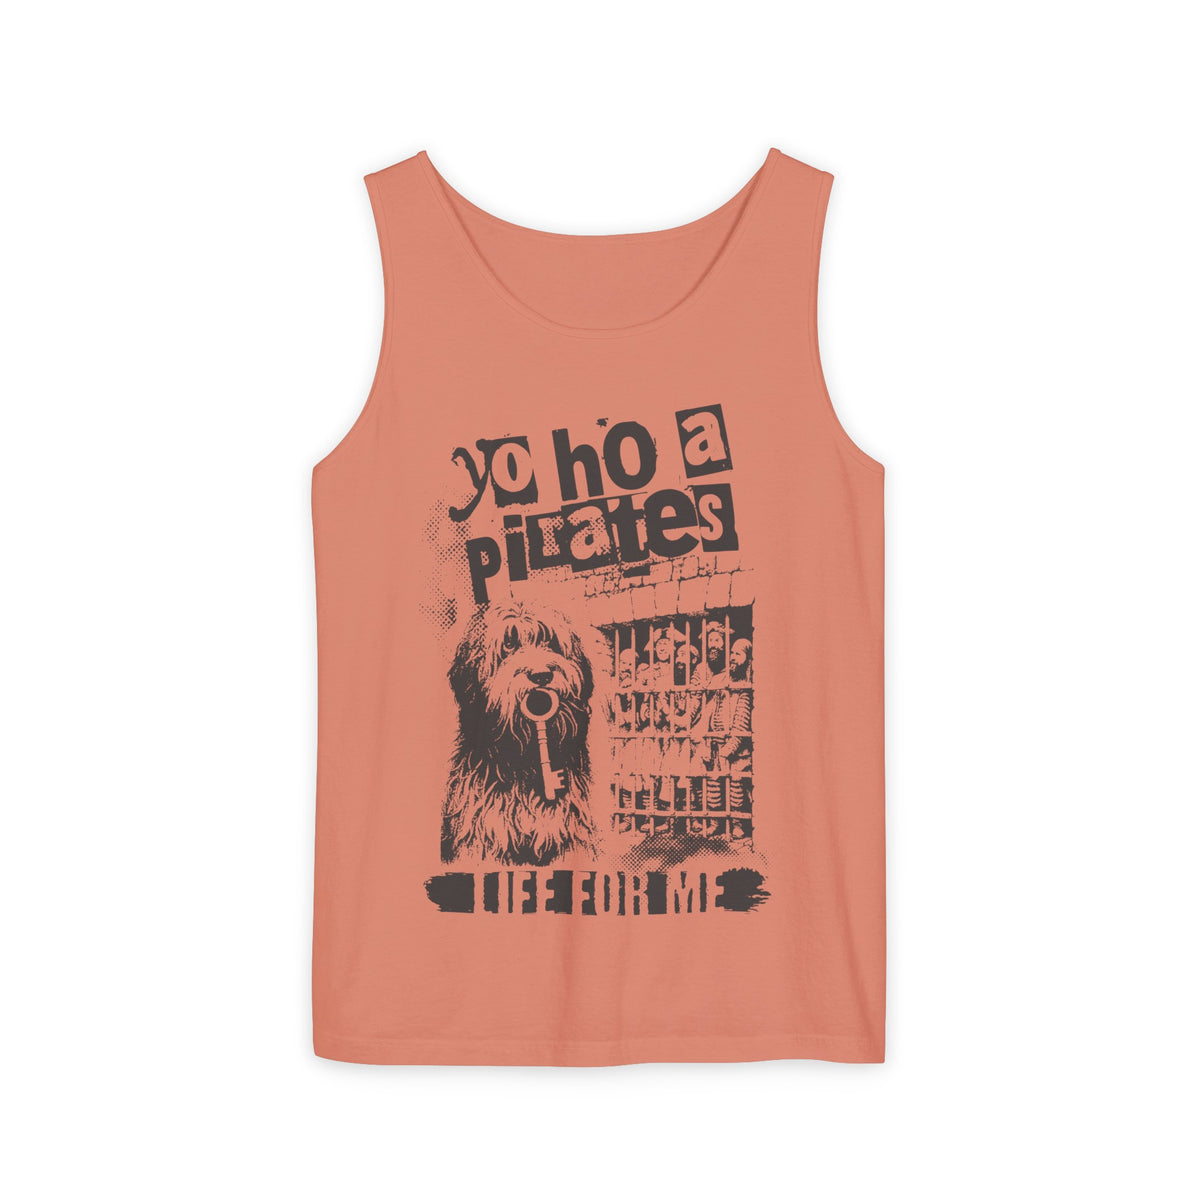 A Pirate's Life For Me Unisex Comfort Colors Garment-Dyed Tank Top